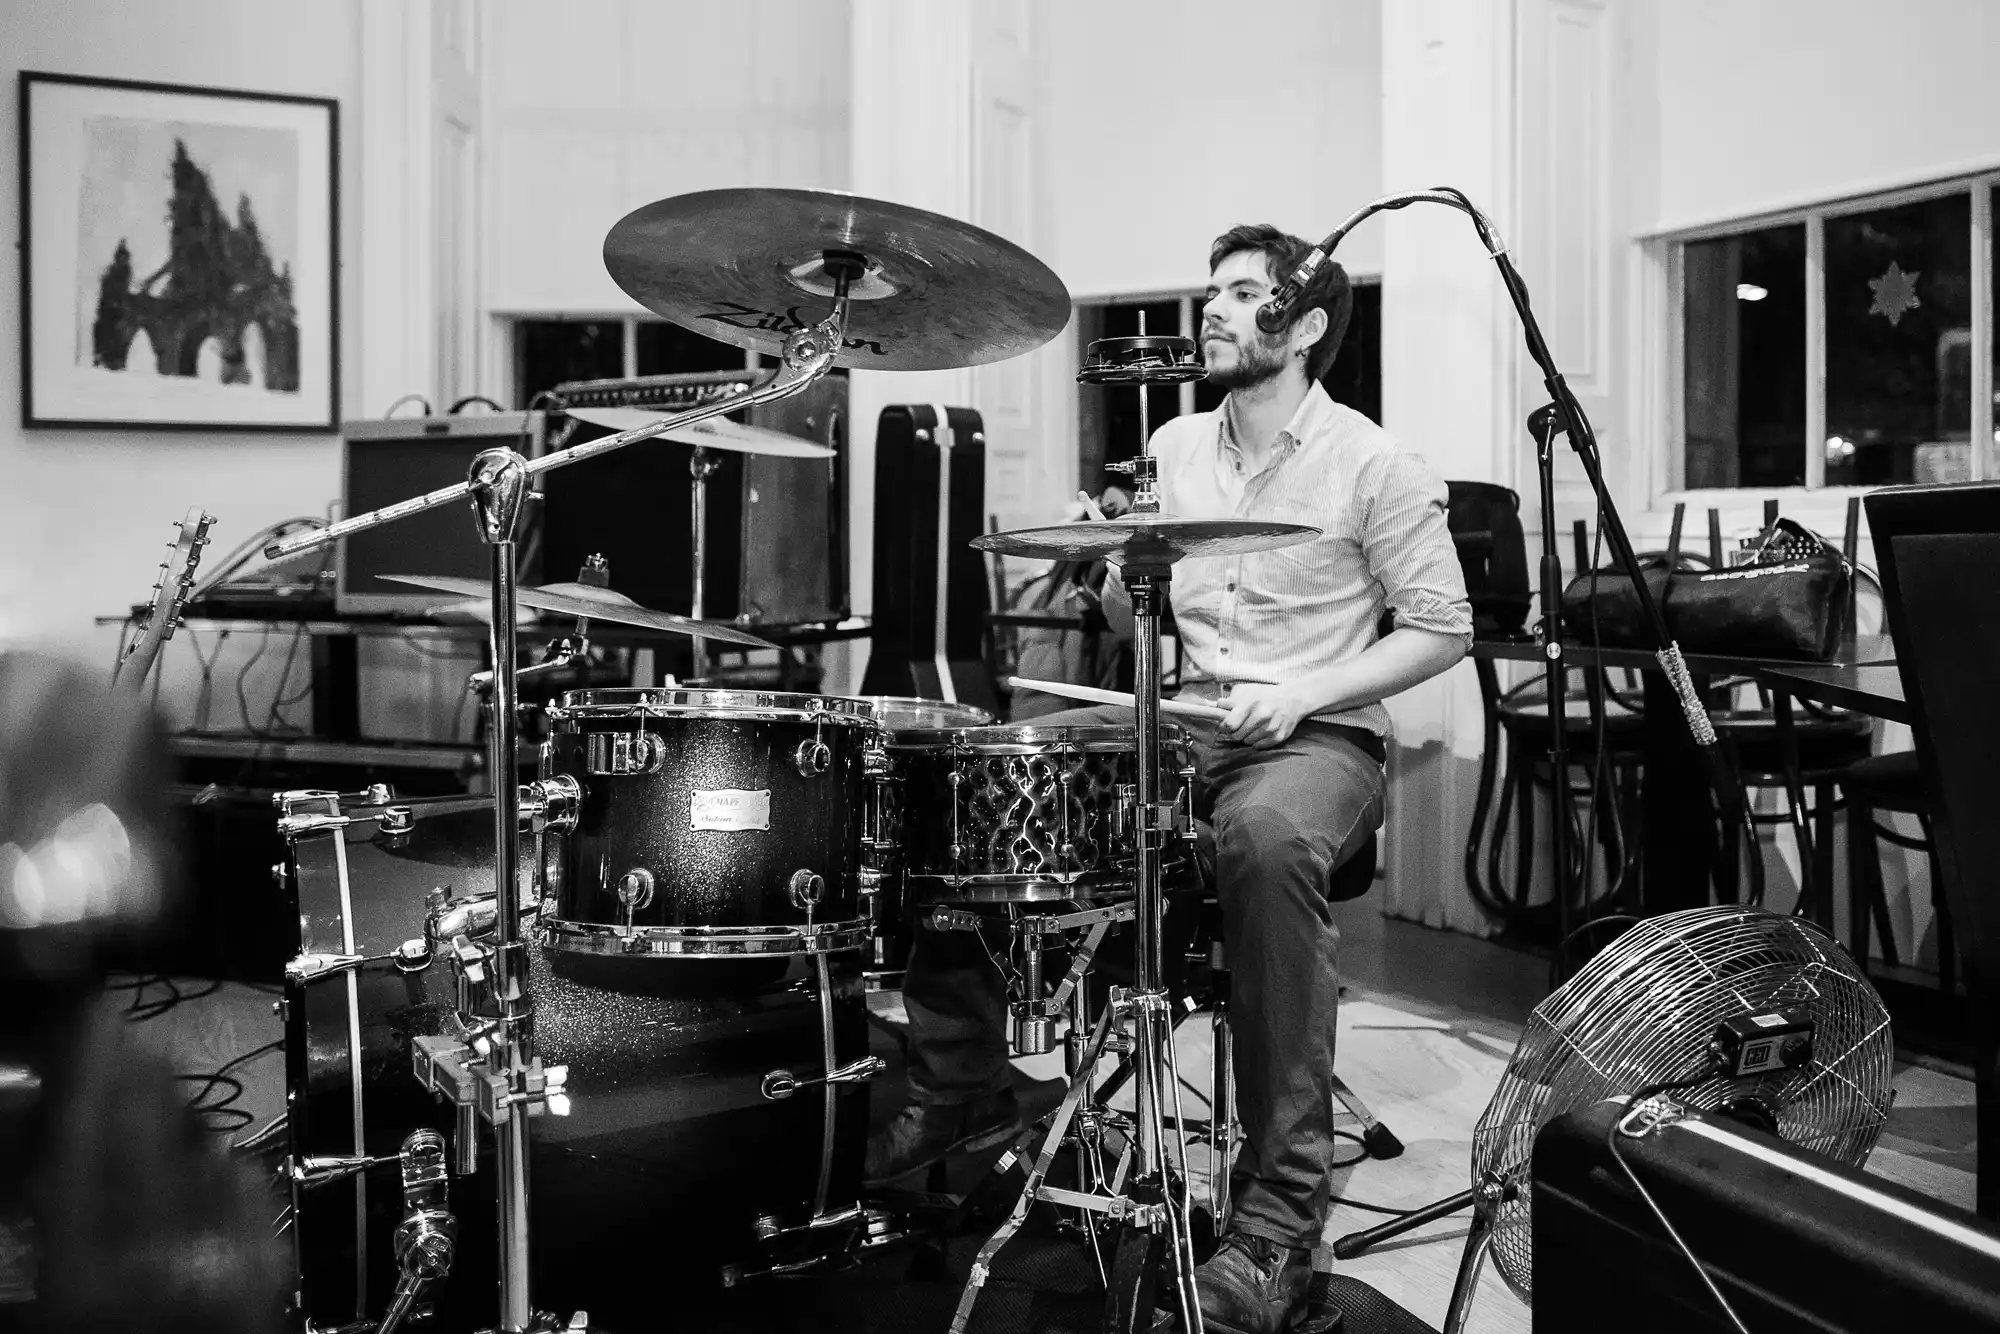 A male drummer playing a drum set in a room with large windows and artworks on the wall, captured in black and white.